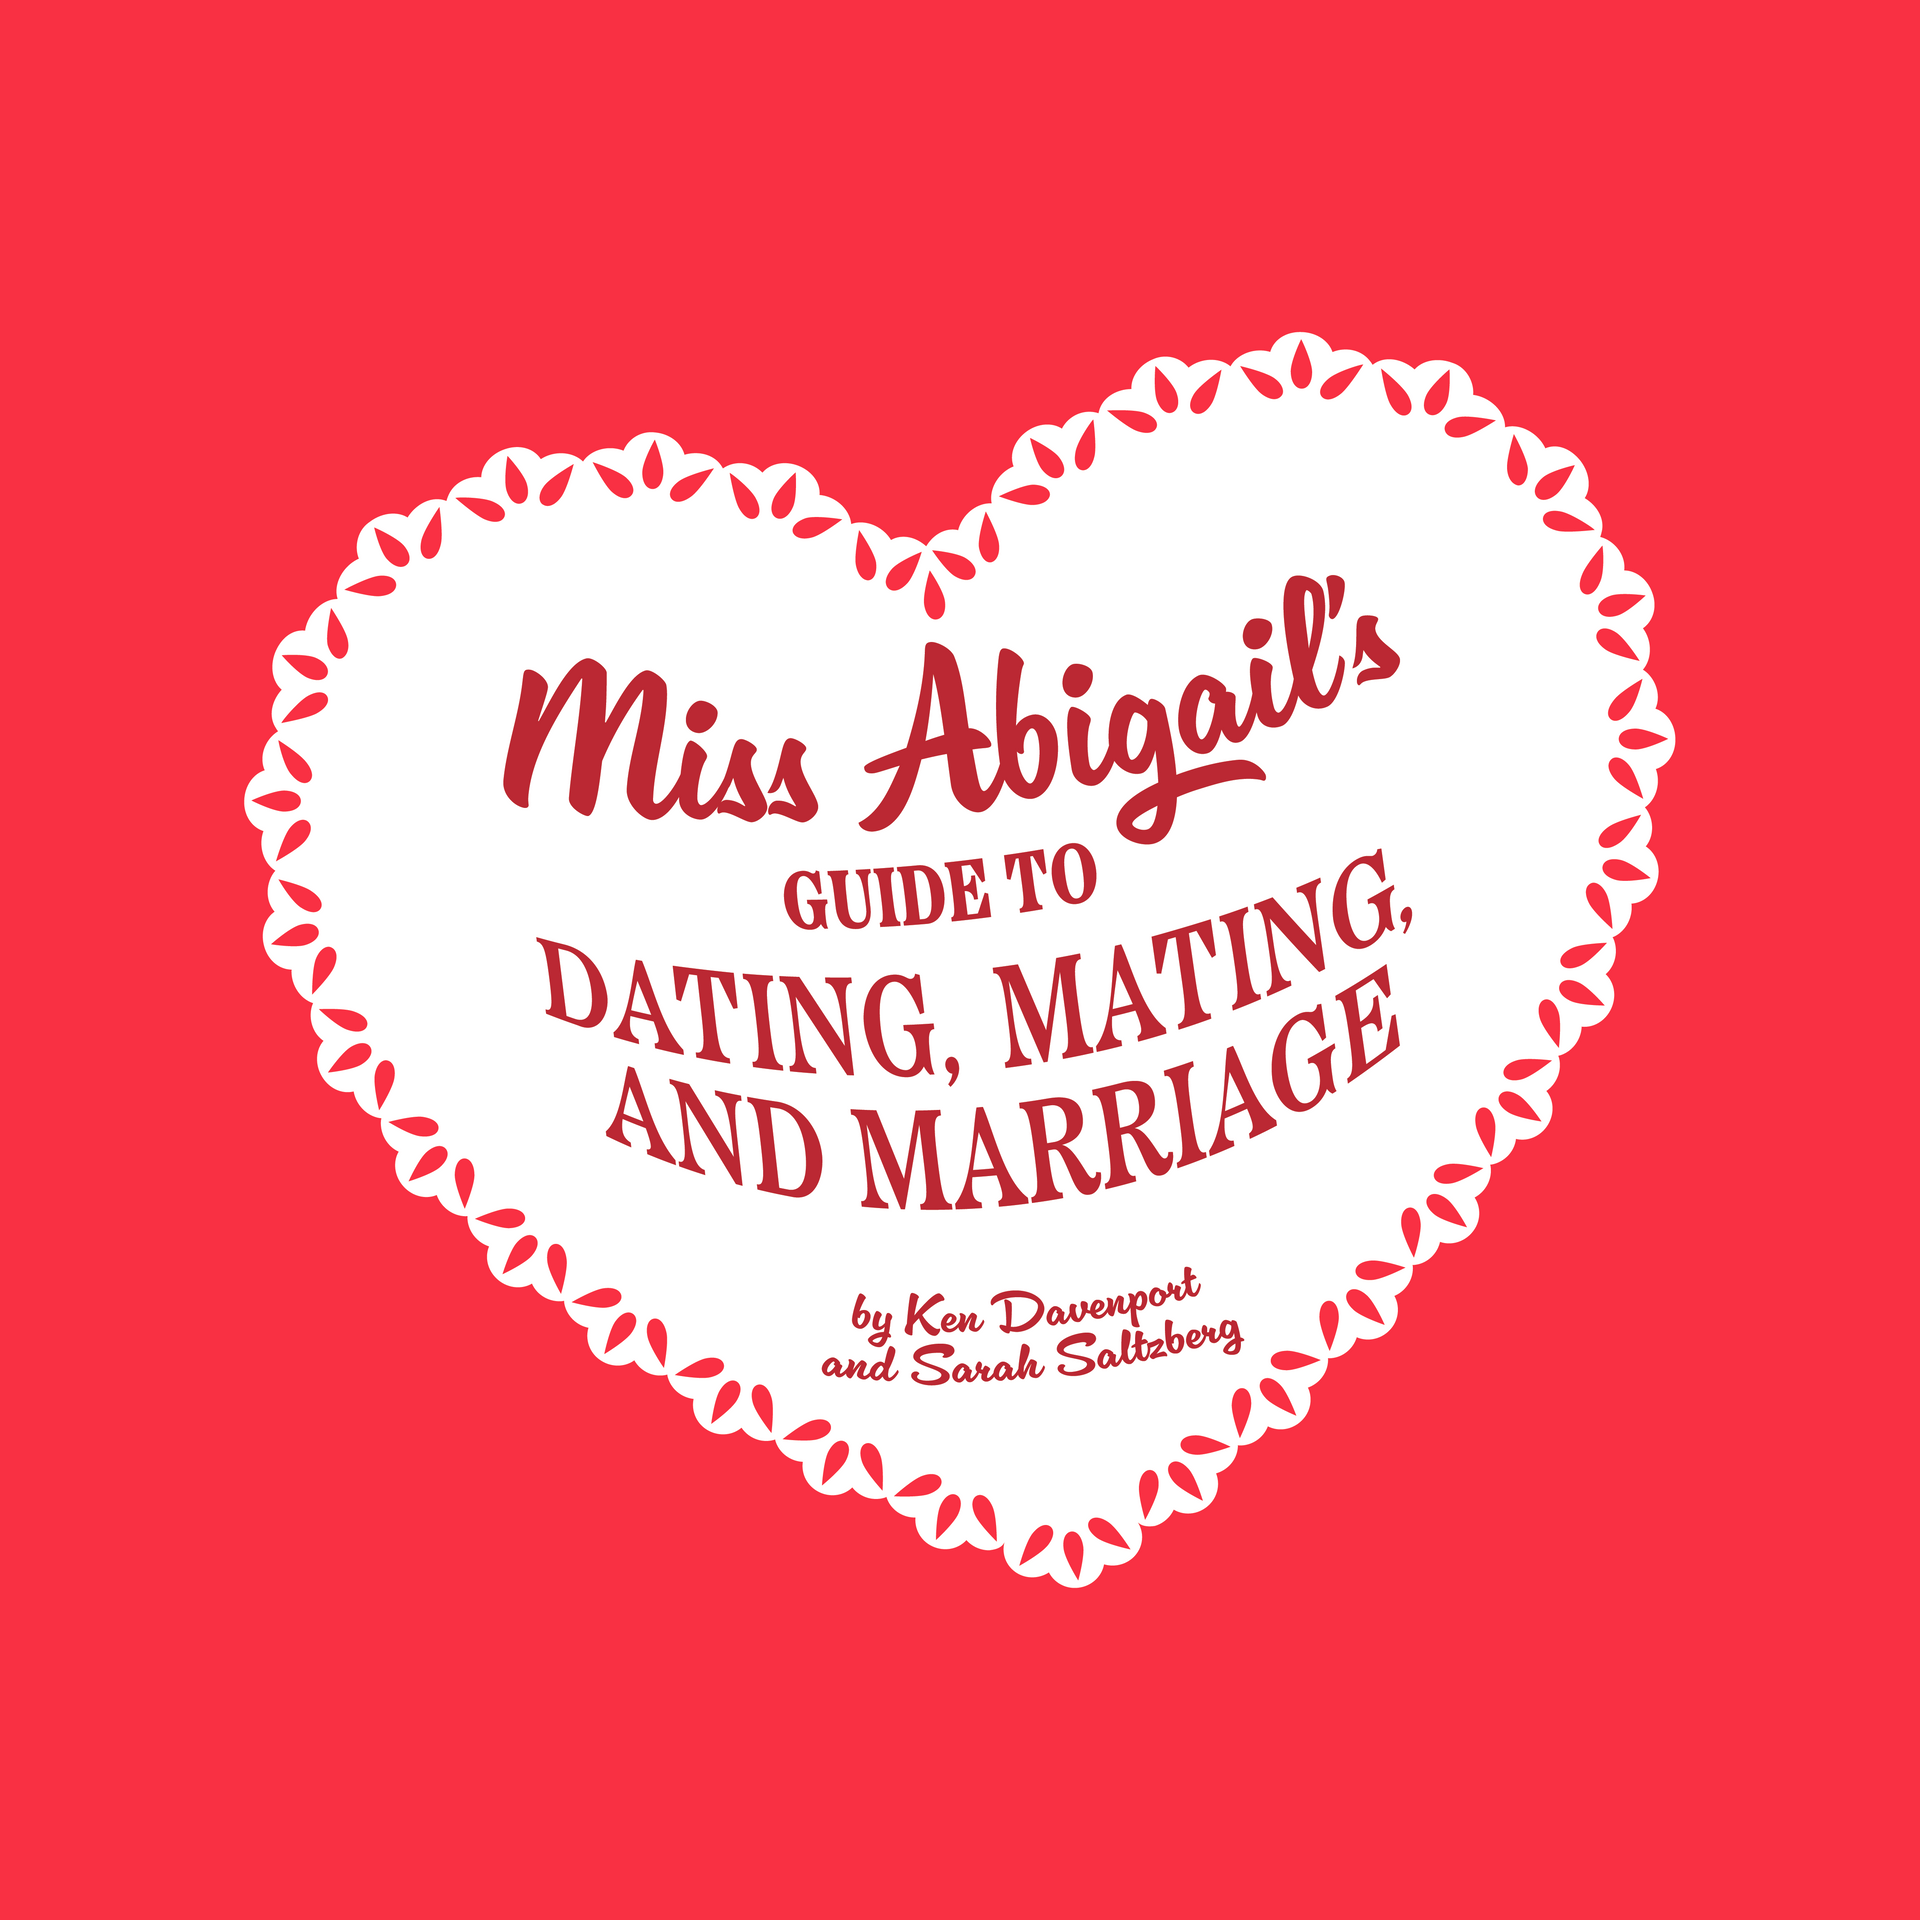 Miss Abigail's guid eto Dating, Mating, and Marriage